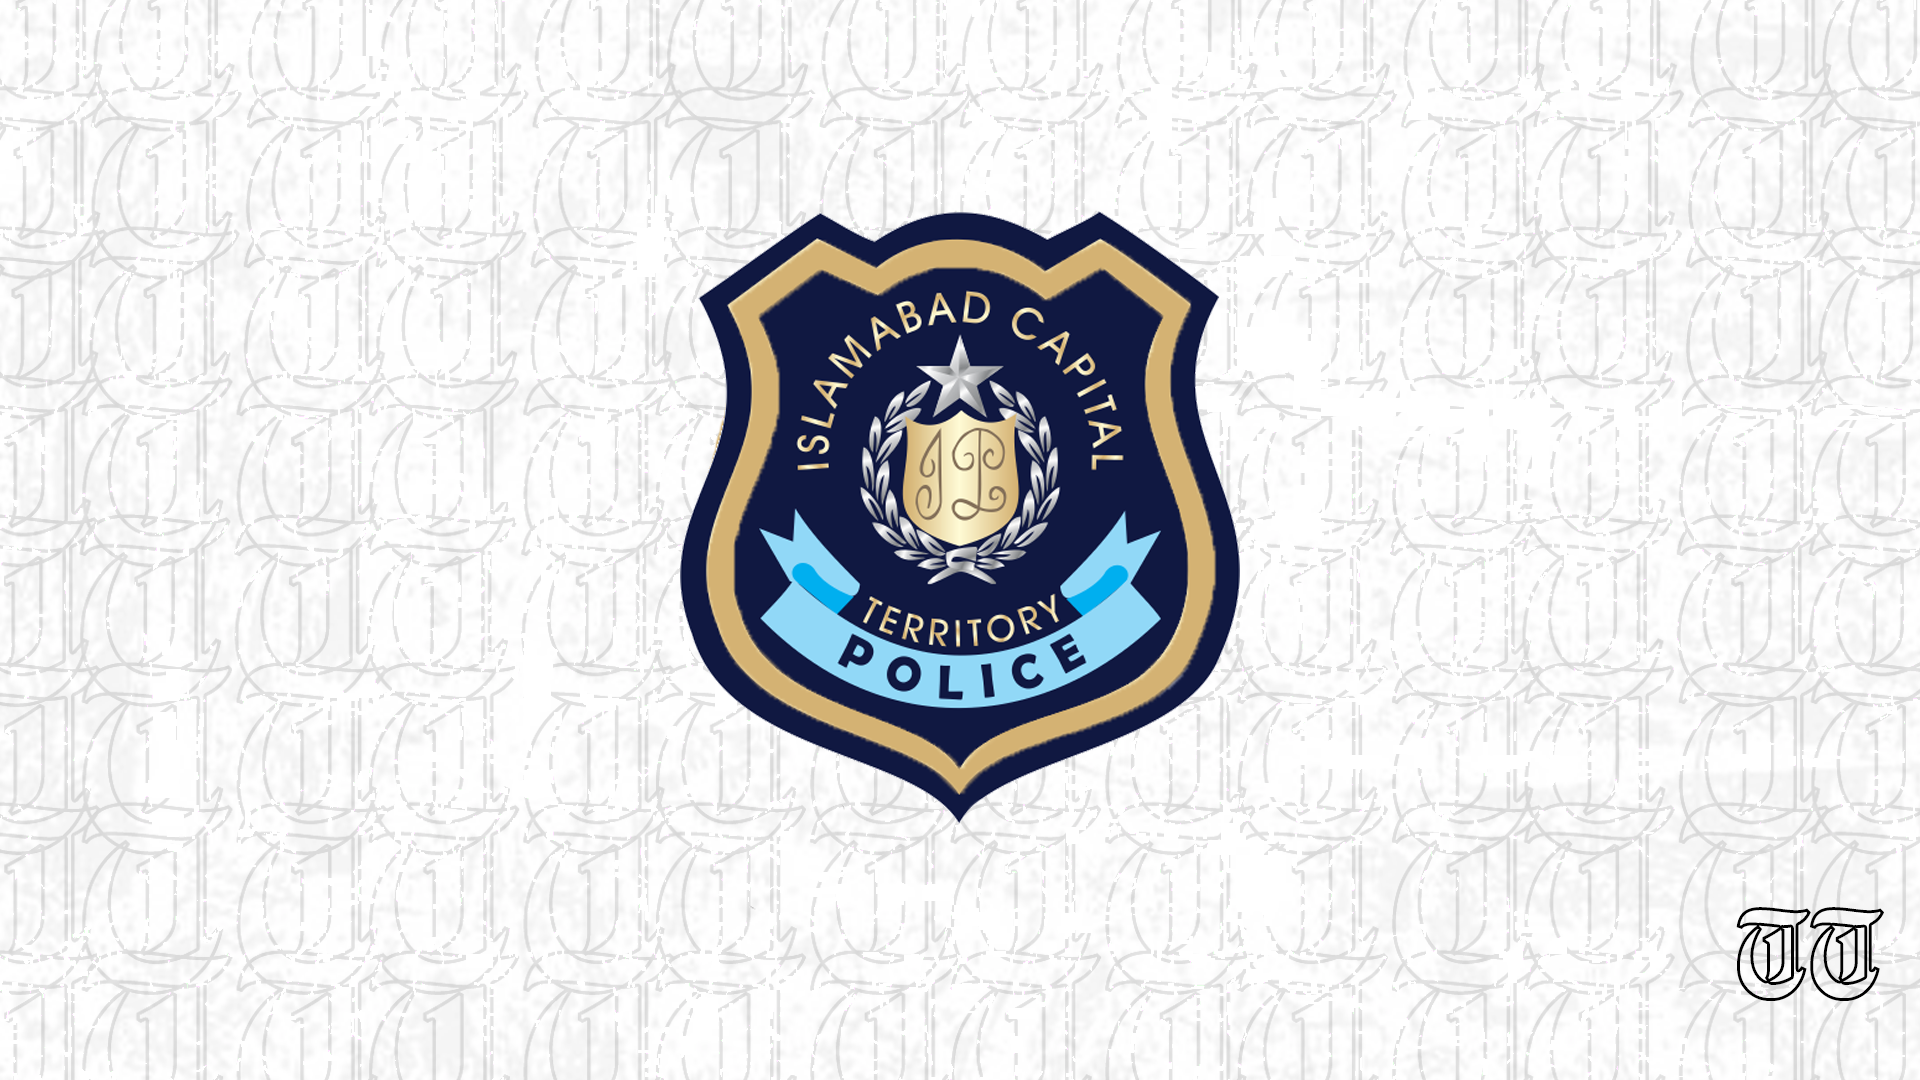 The logo of the Islamabad Capital Territory police is shown.